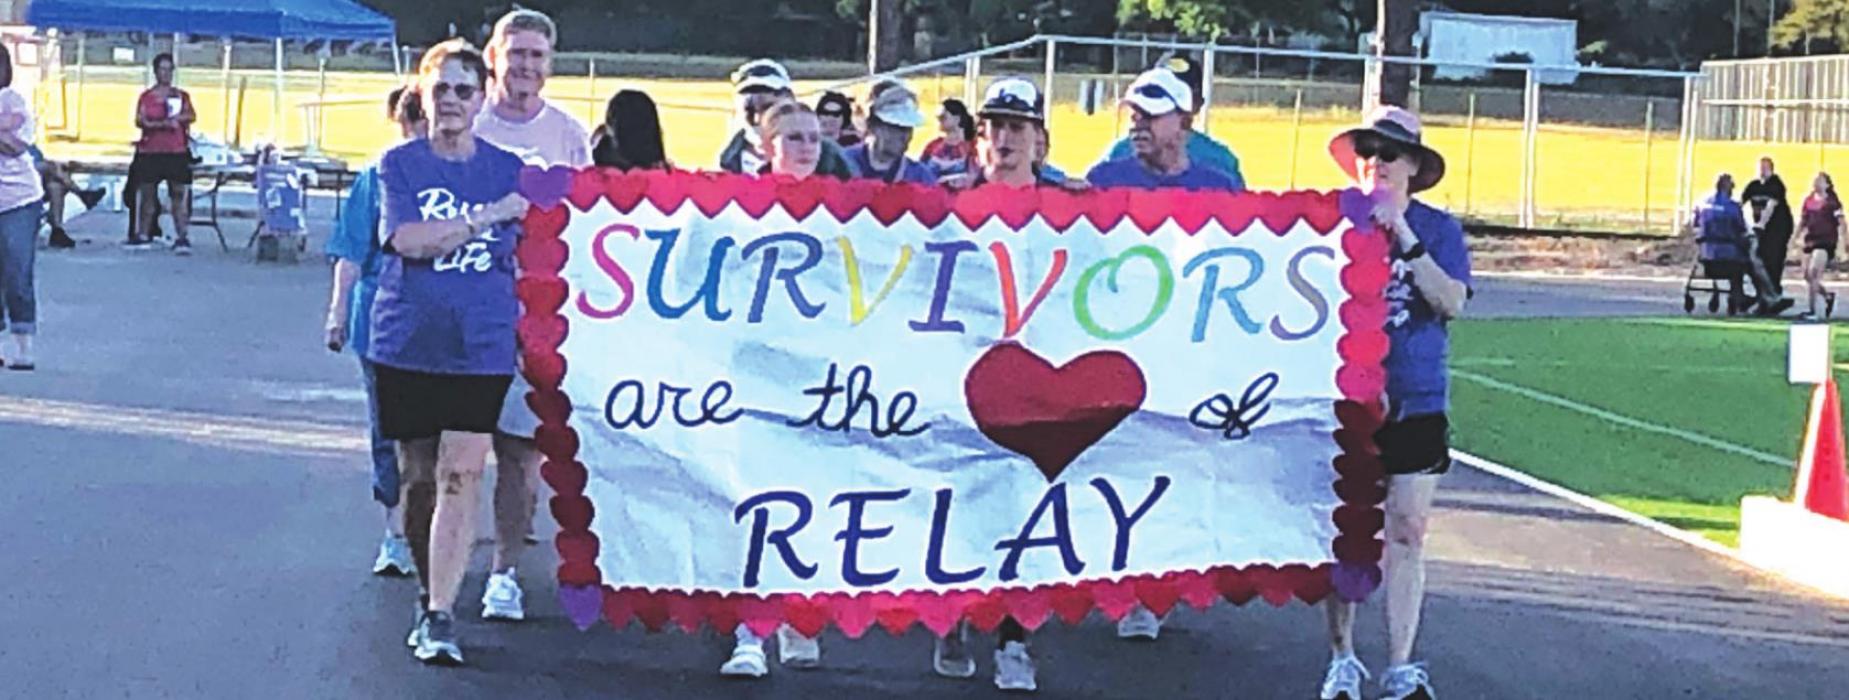 The Relay for Life, held last Saturday at Leopard Stadium, helps raise awareness and money for cancer research. Some 75 local participants helped raise over $30,000 this year.